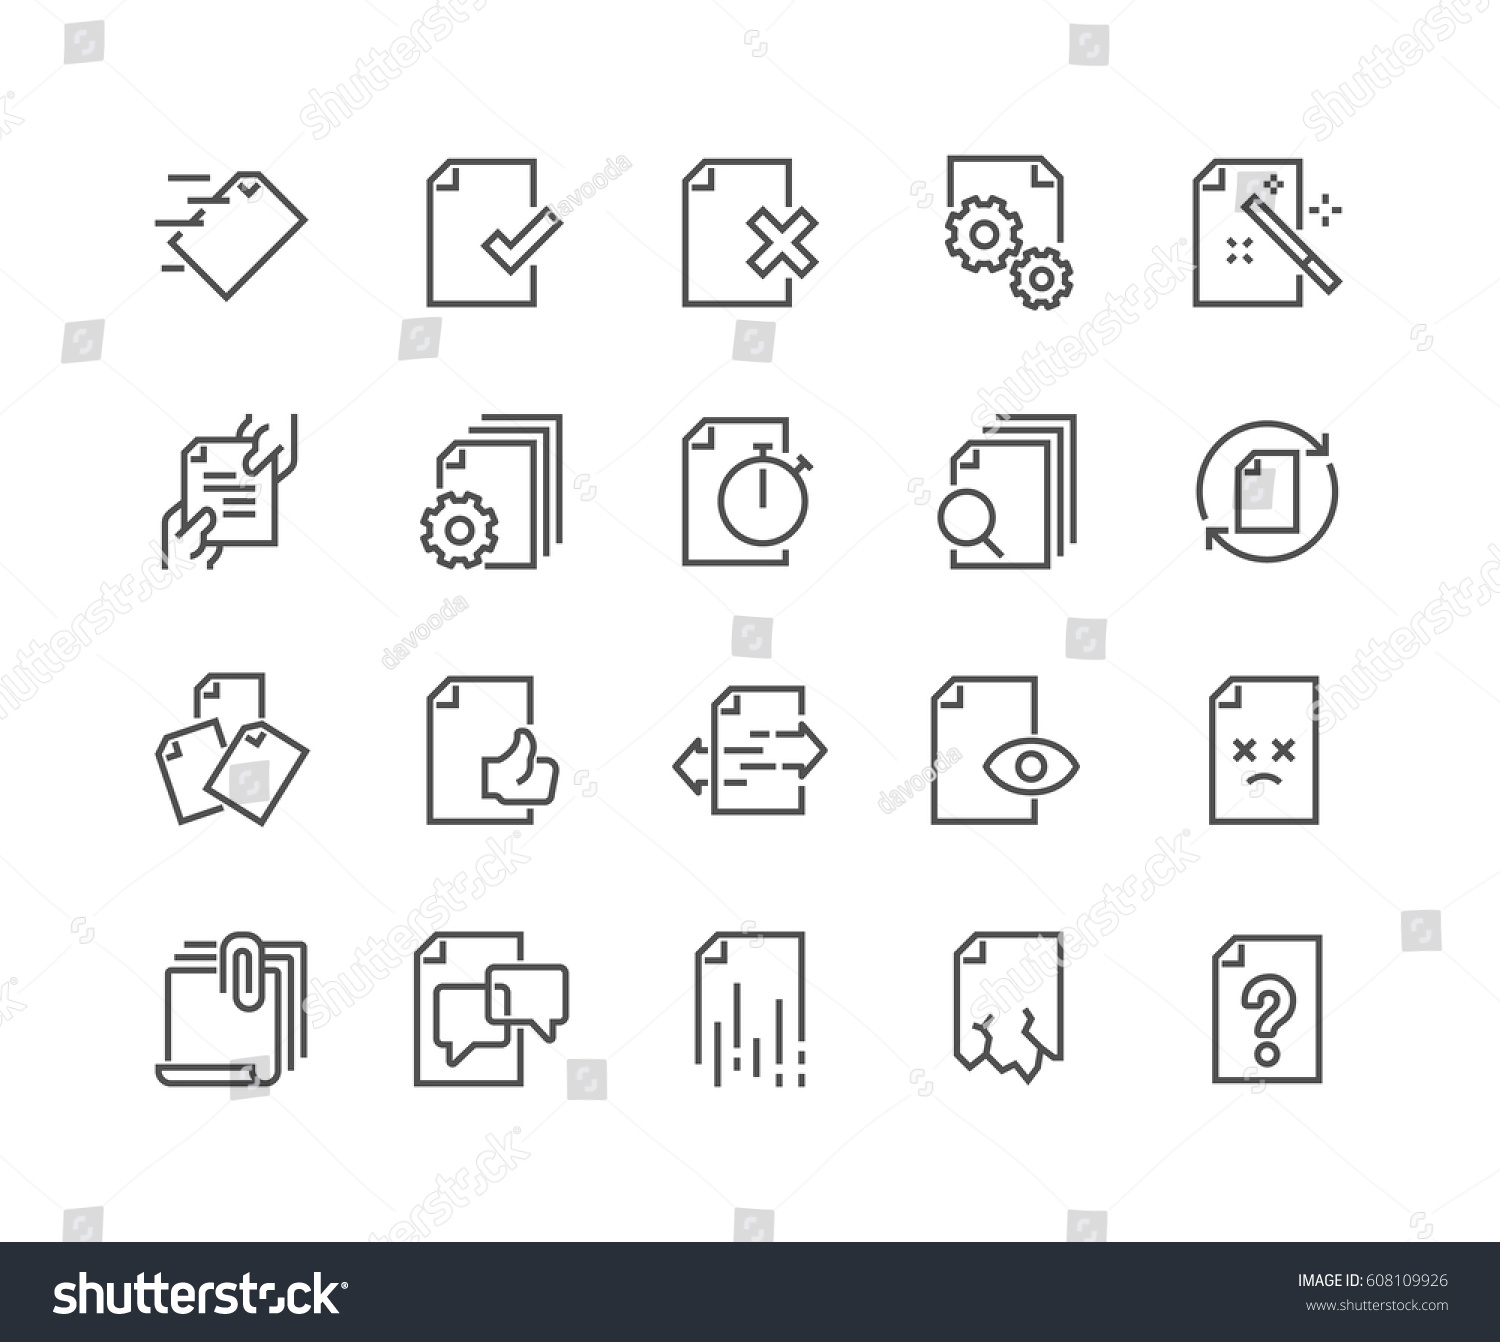 Simple Set of Document Flow Management Vector Line Icons. 
Contains such Icons as Bureaucracy, Batch Processing, Accept, Decline Document and more.
Editable Stroke. 48x48 Pixel Perfect. #608109926